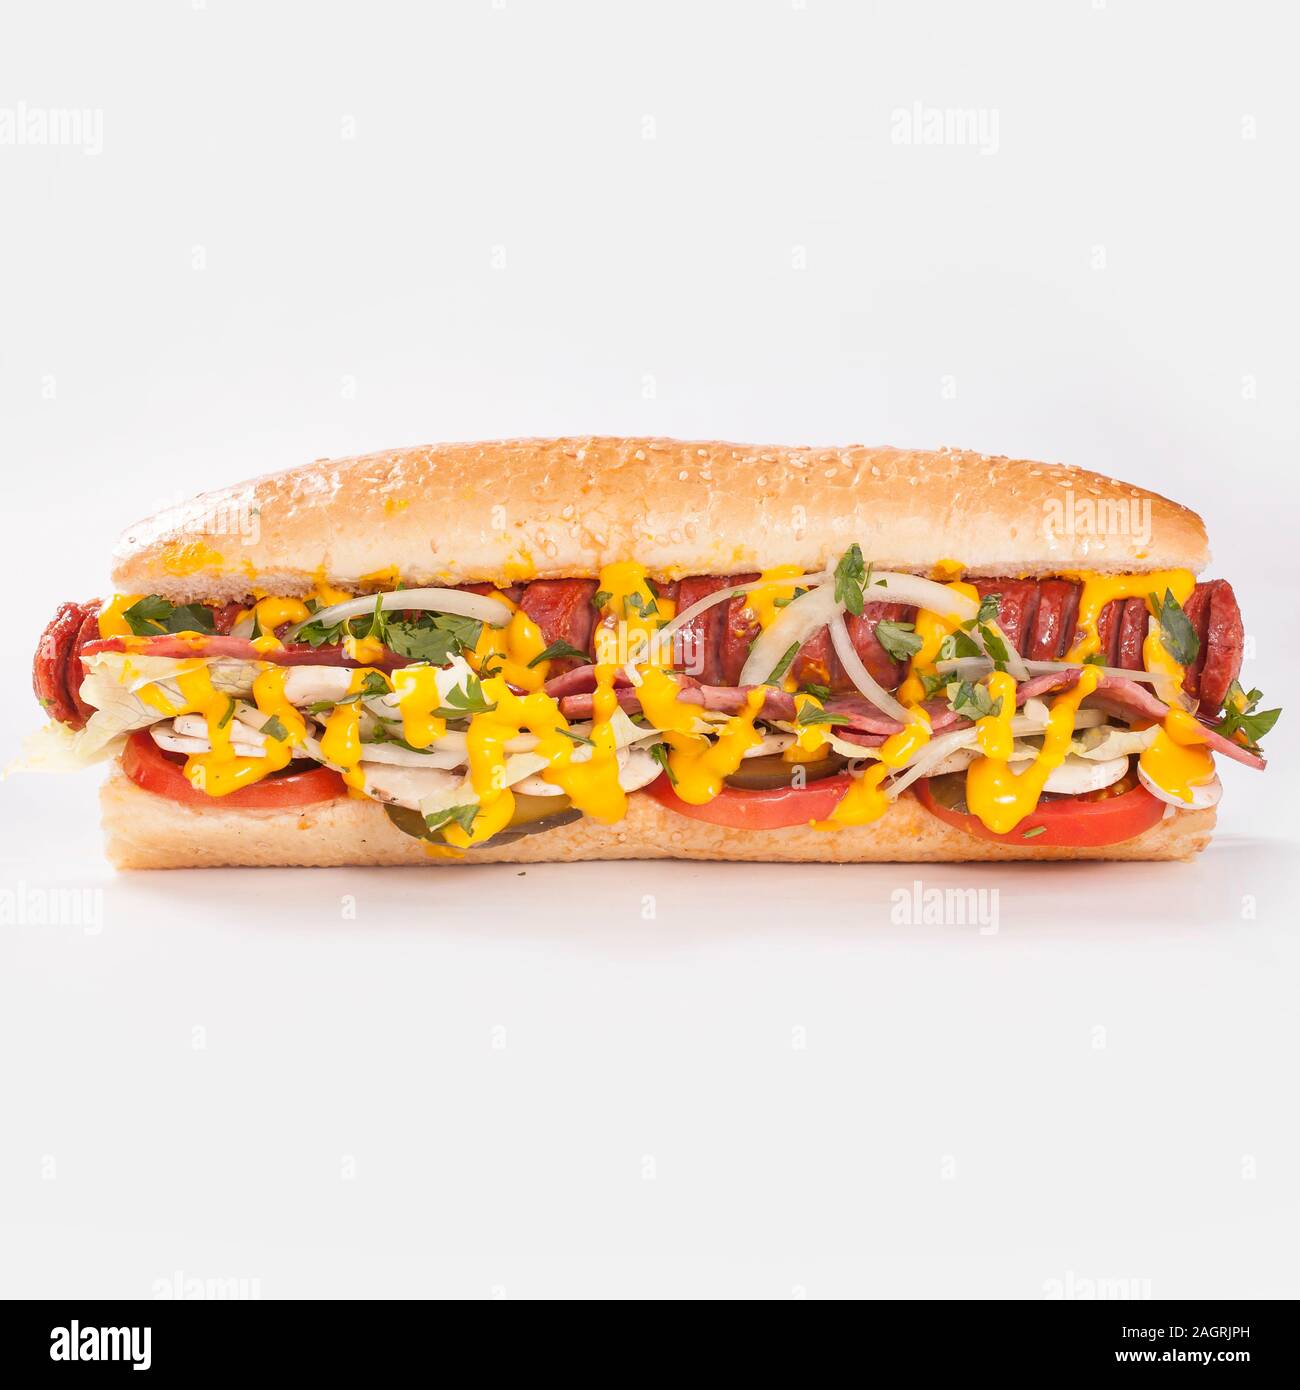 Hot dog sandwich with special sauce Stock Photo